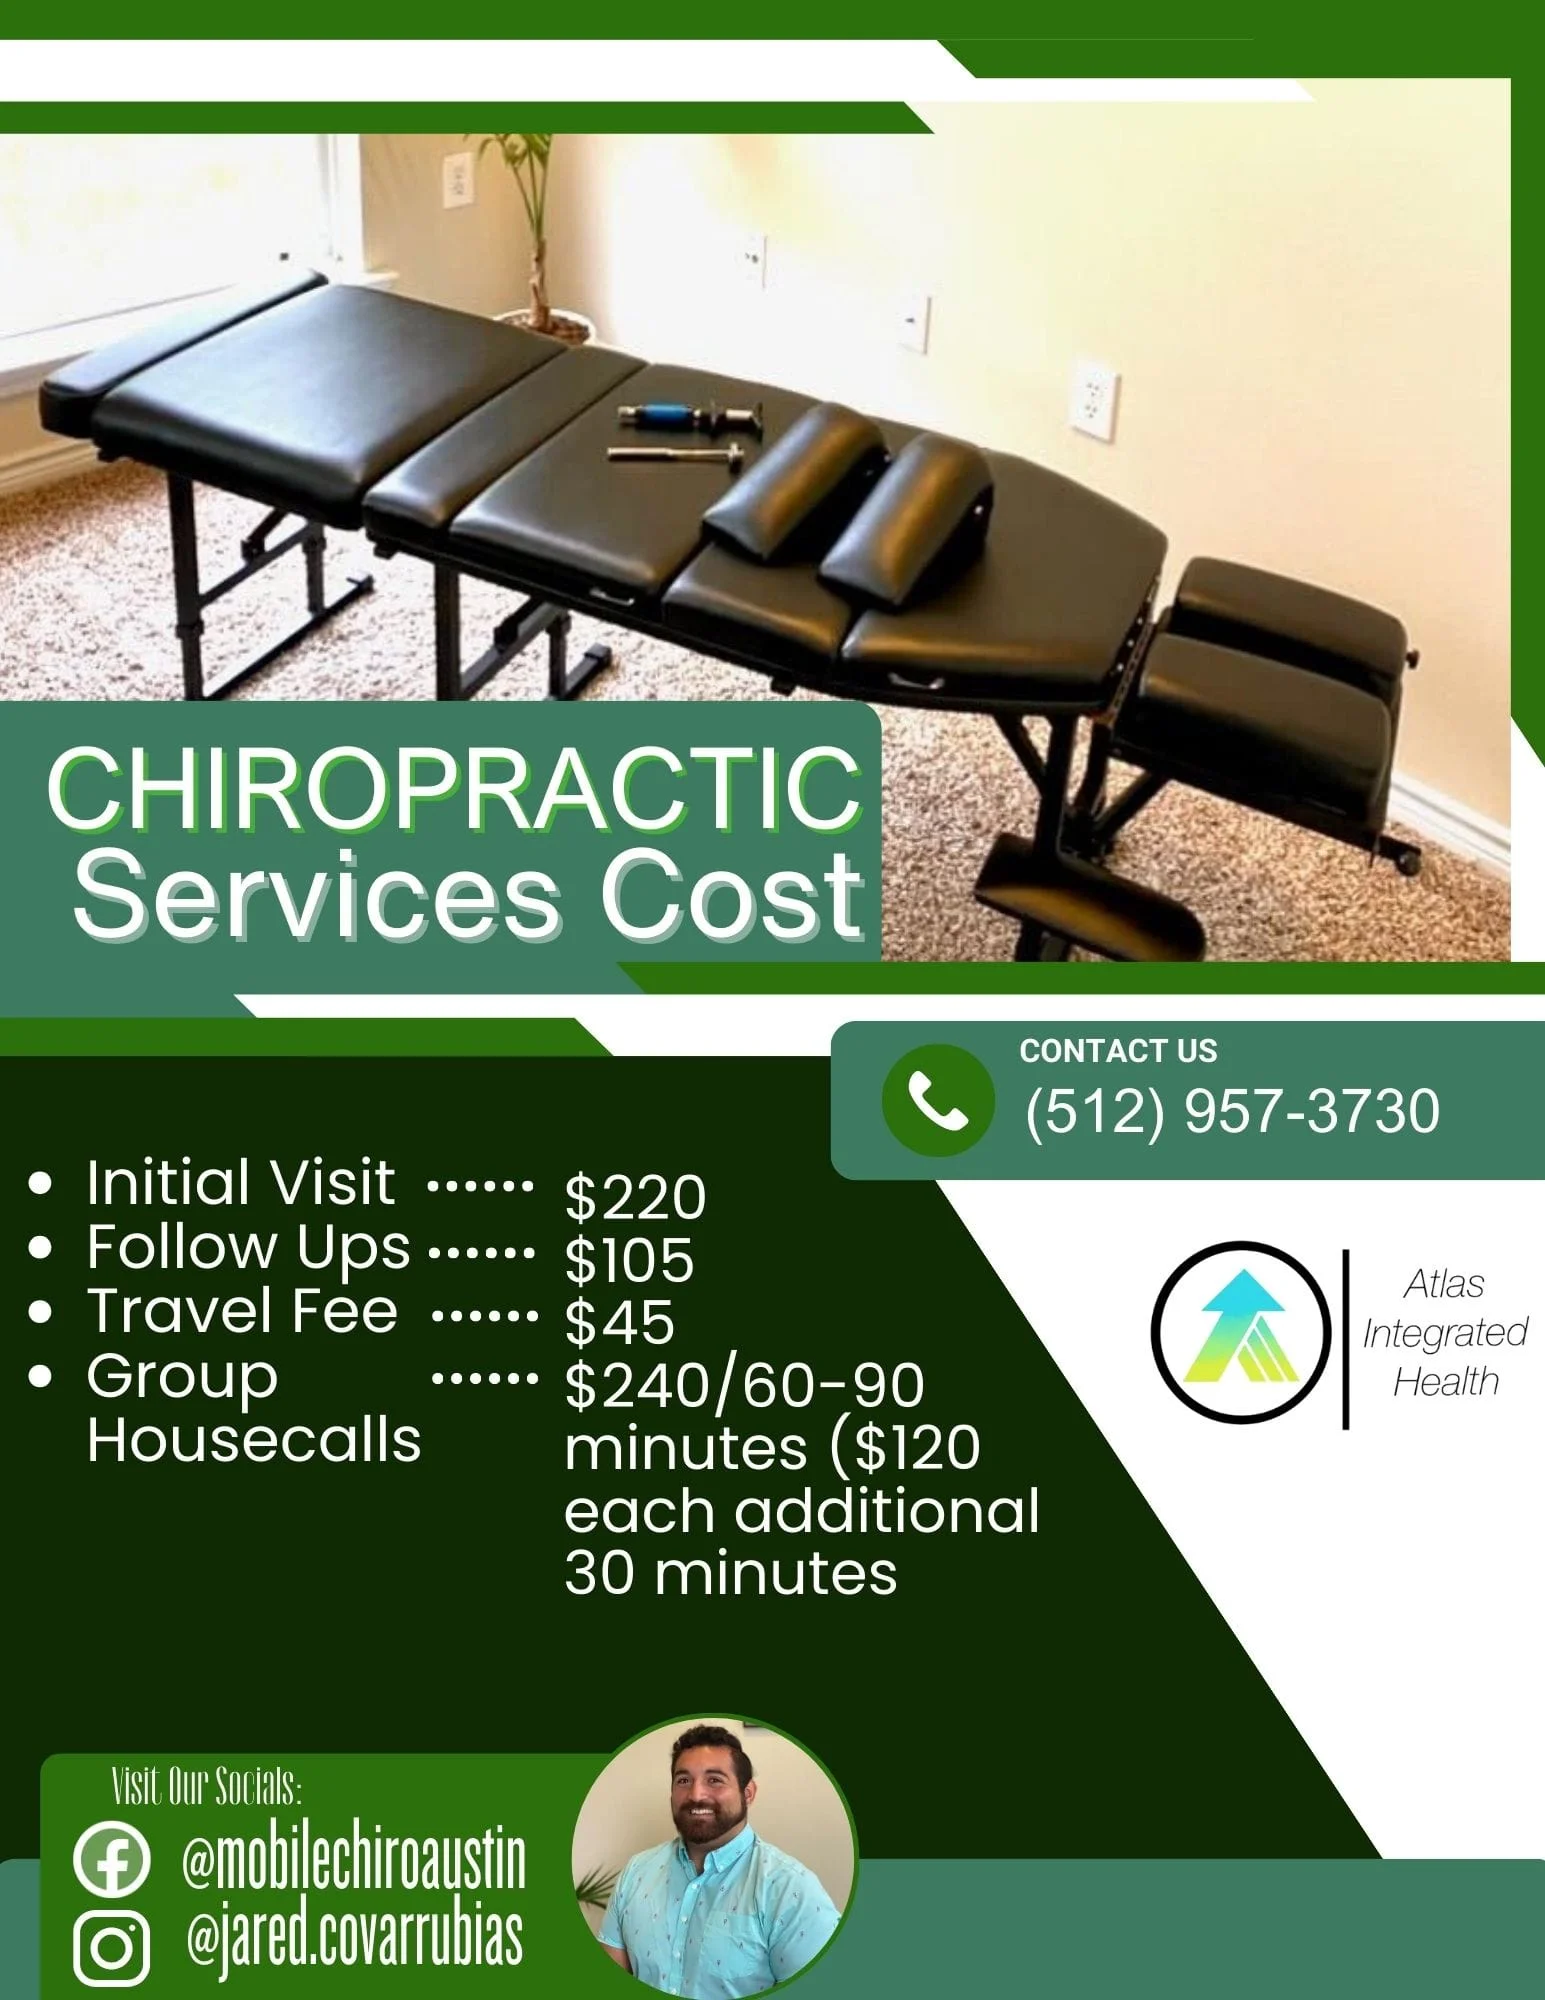 Atlas Integrative Health uses an integrative approach to help the body heal through Chiropractic care, nutrition, manual fascial therapy, and other lifestyle changes.